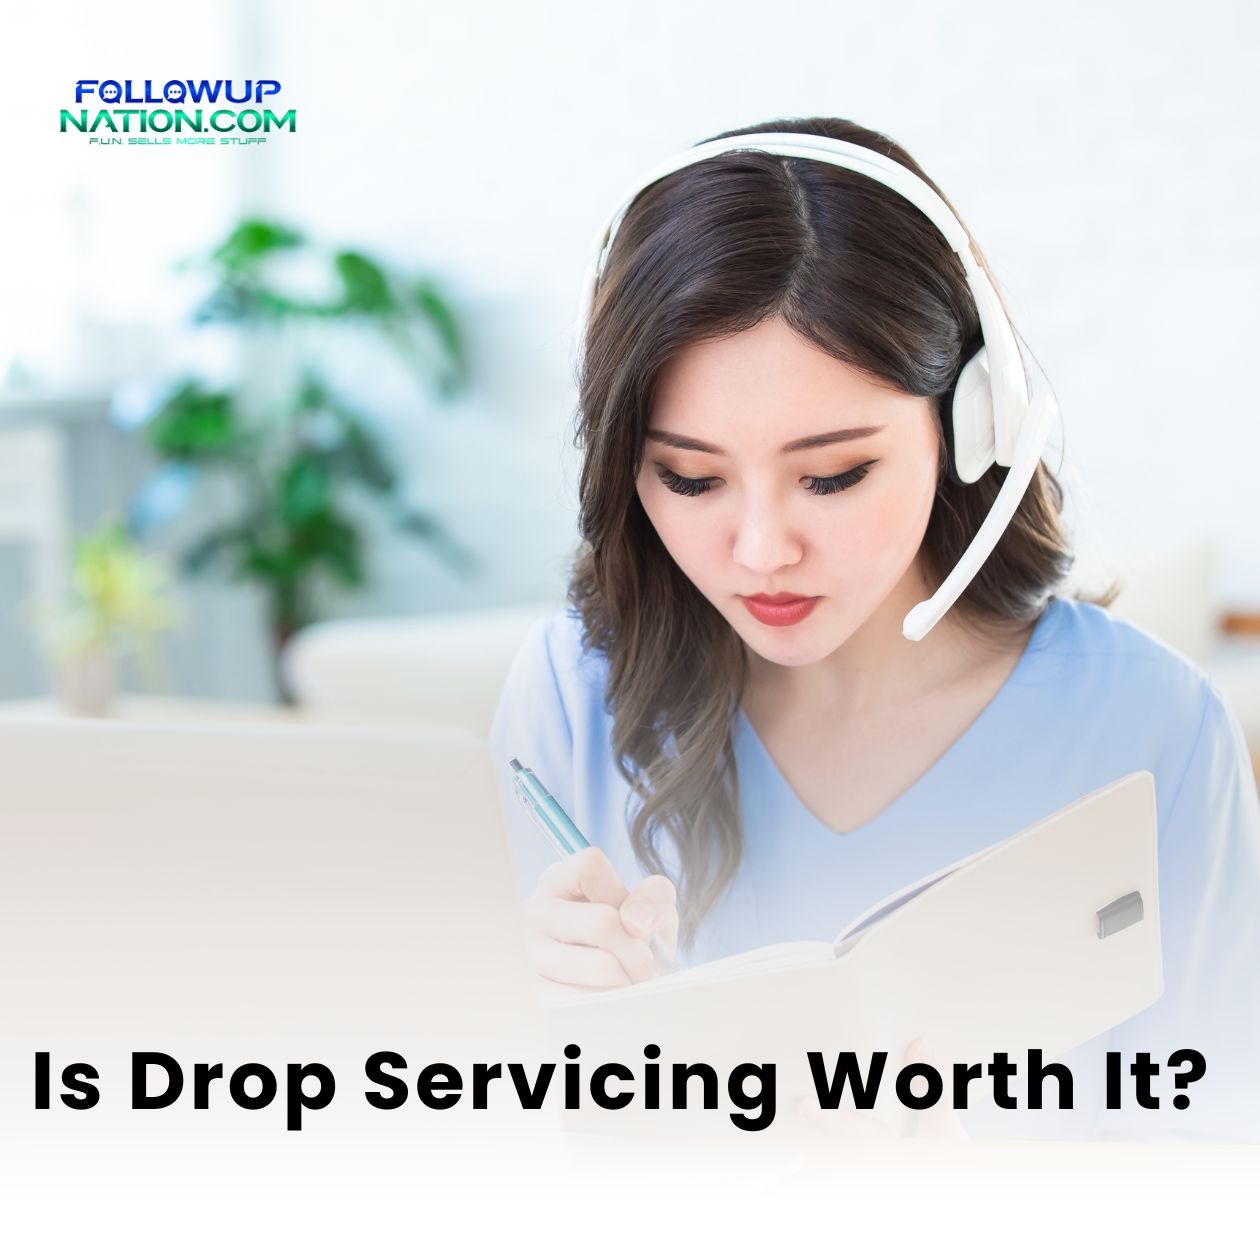 Is Drop Servicing Worth It? Pros and Cons of Drop Servicing